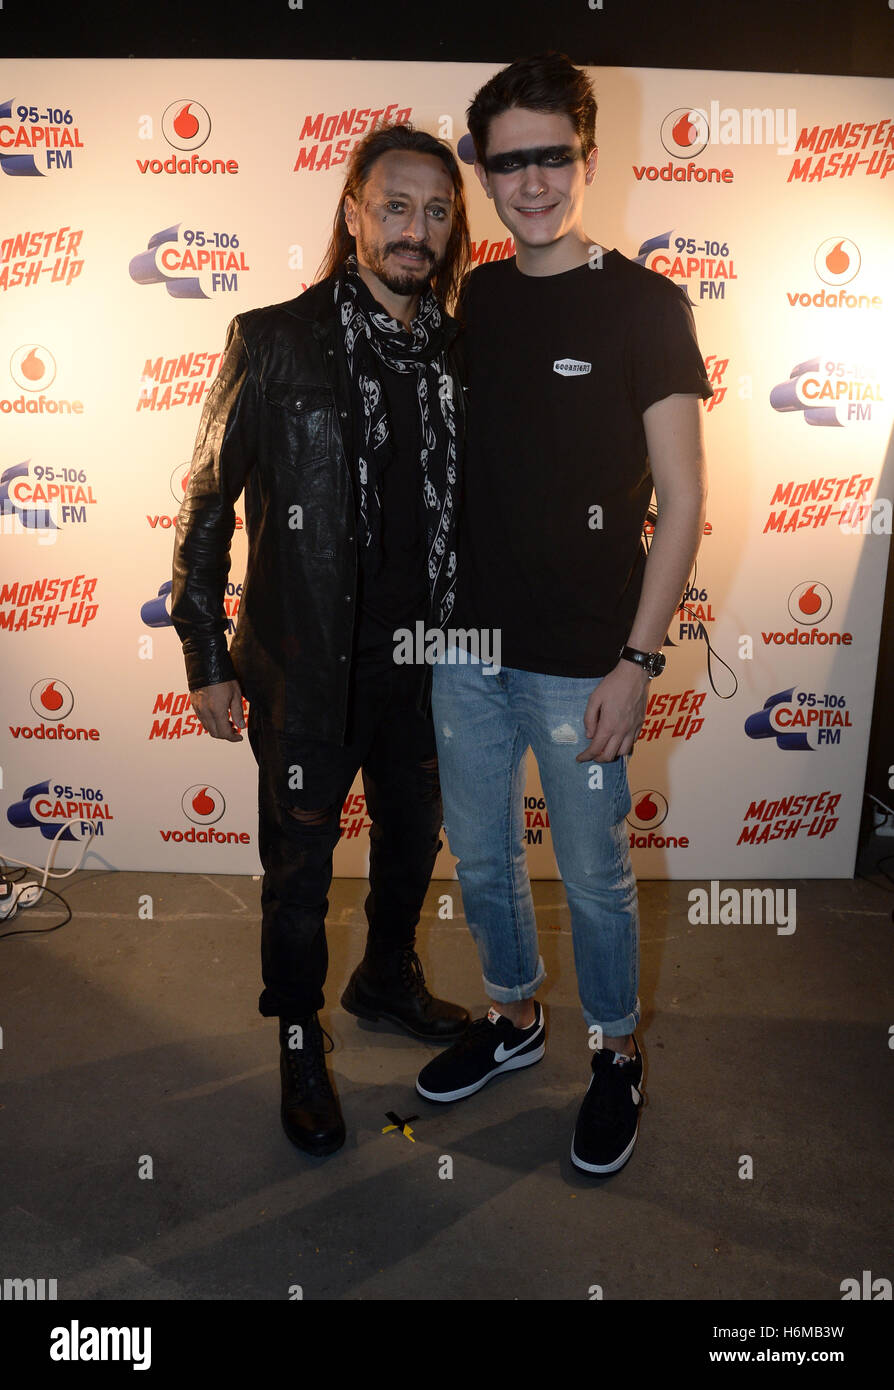 Bob Sinclar and Kungs backstage during Capital FM's Monster Mash